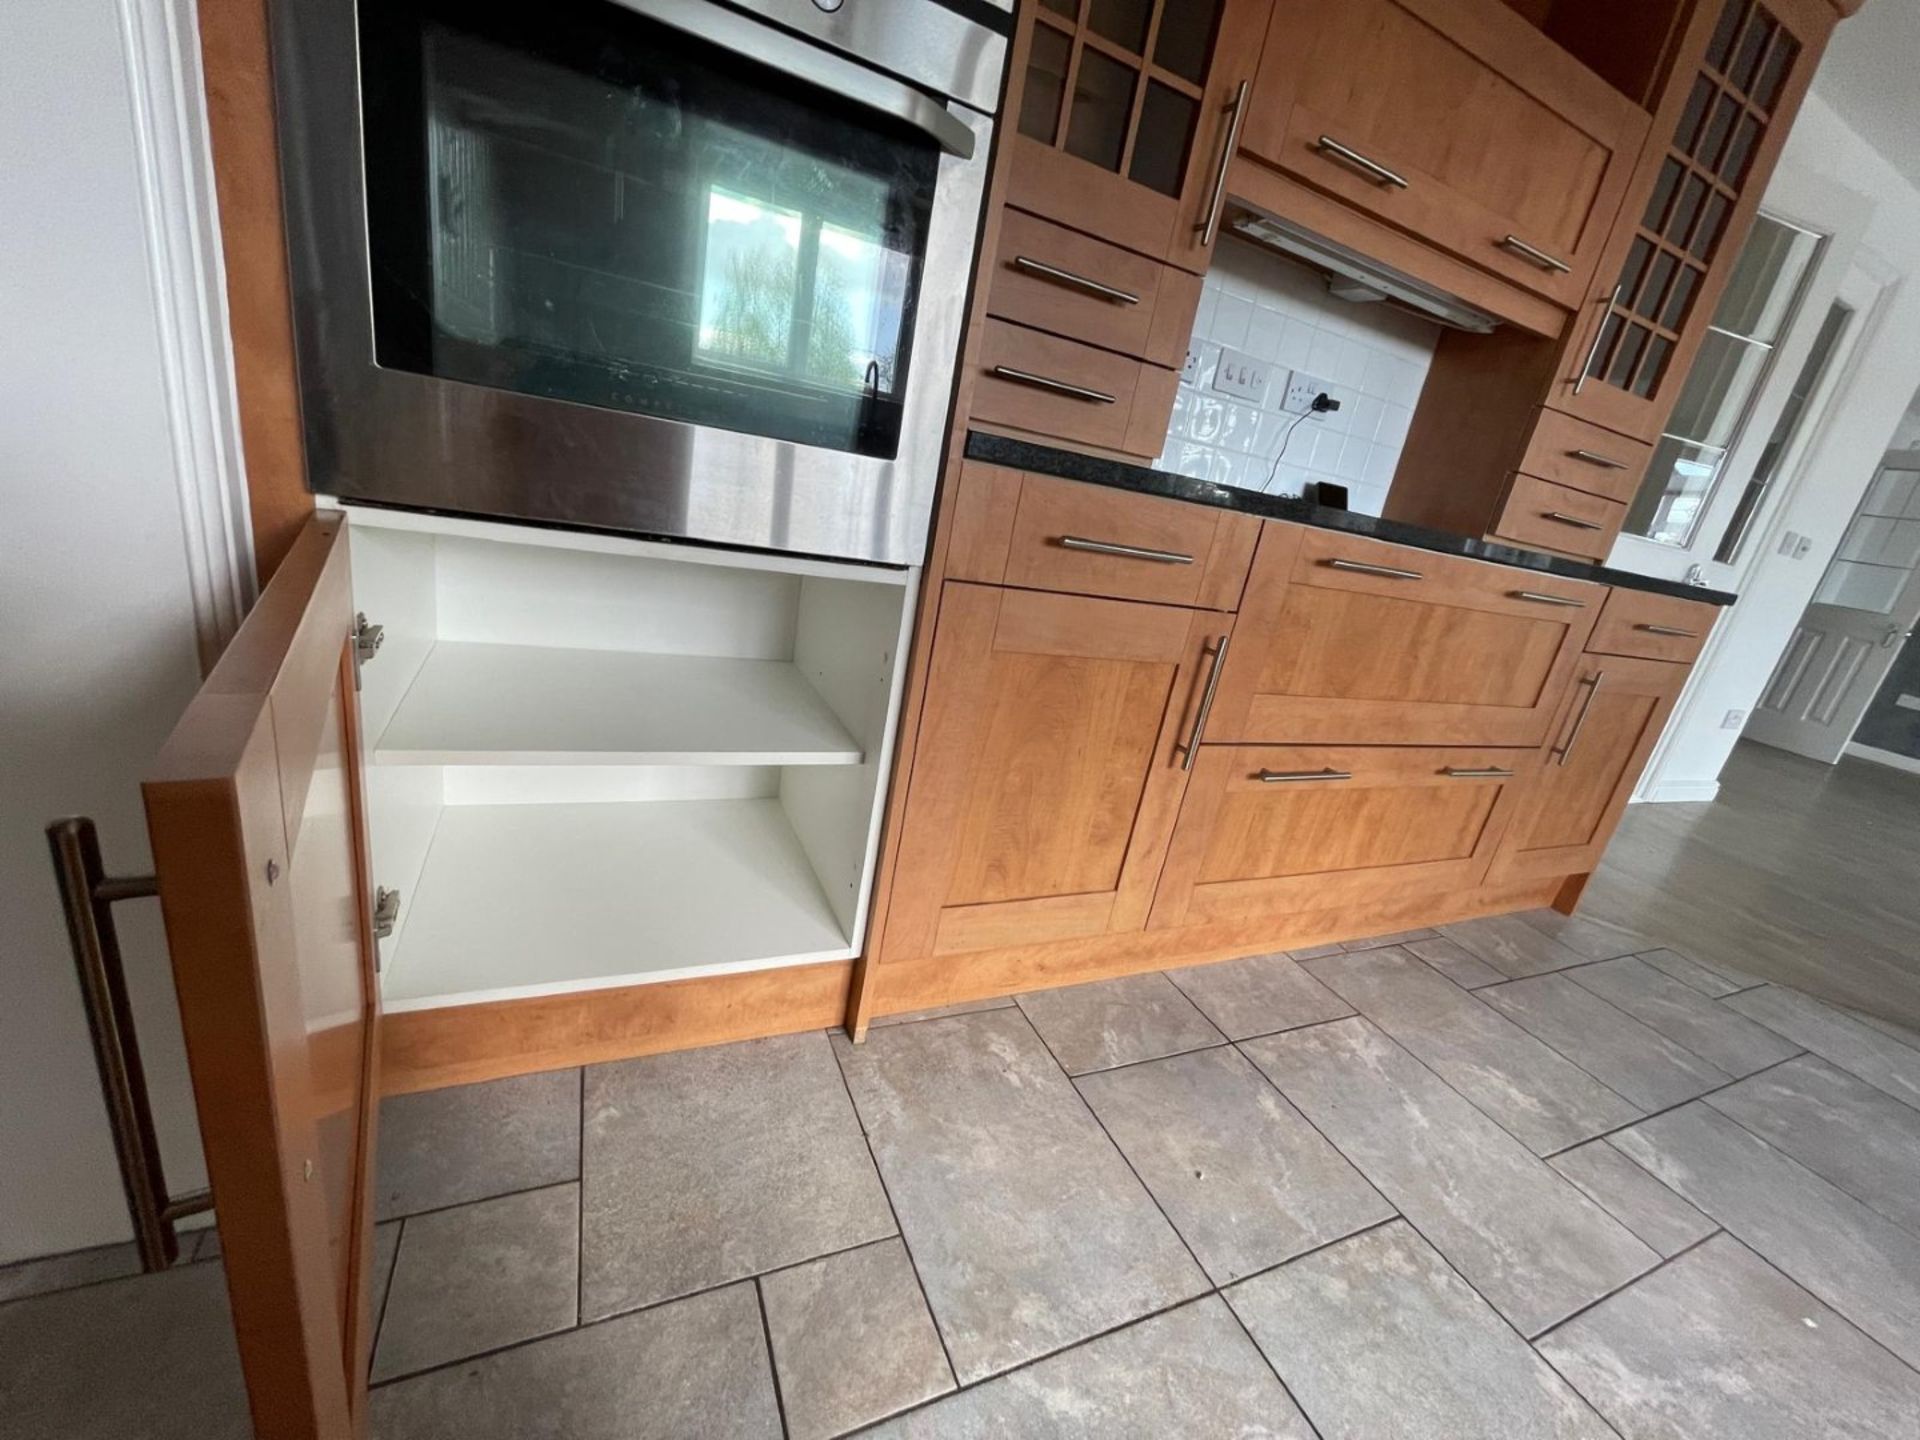 1 x Shaker-style, Feature-rich Fitted Kitchen with Solid Wood Doors, Granite Worktops and Appliances - Image 26 of 111